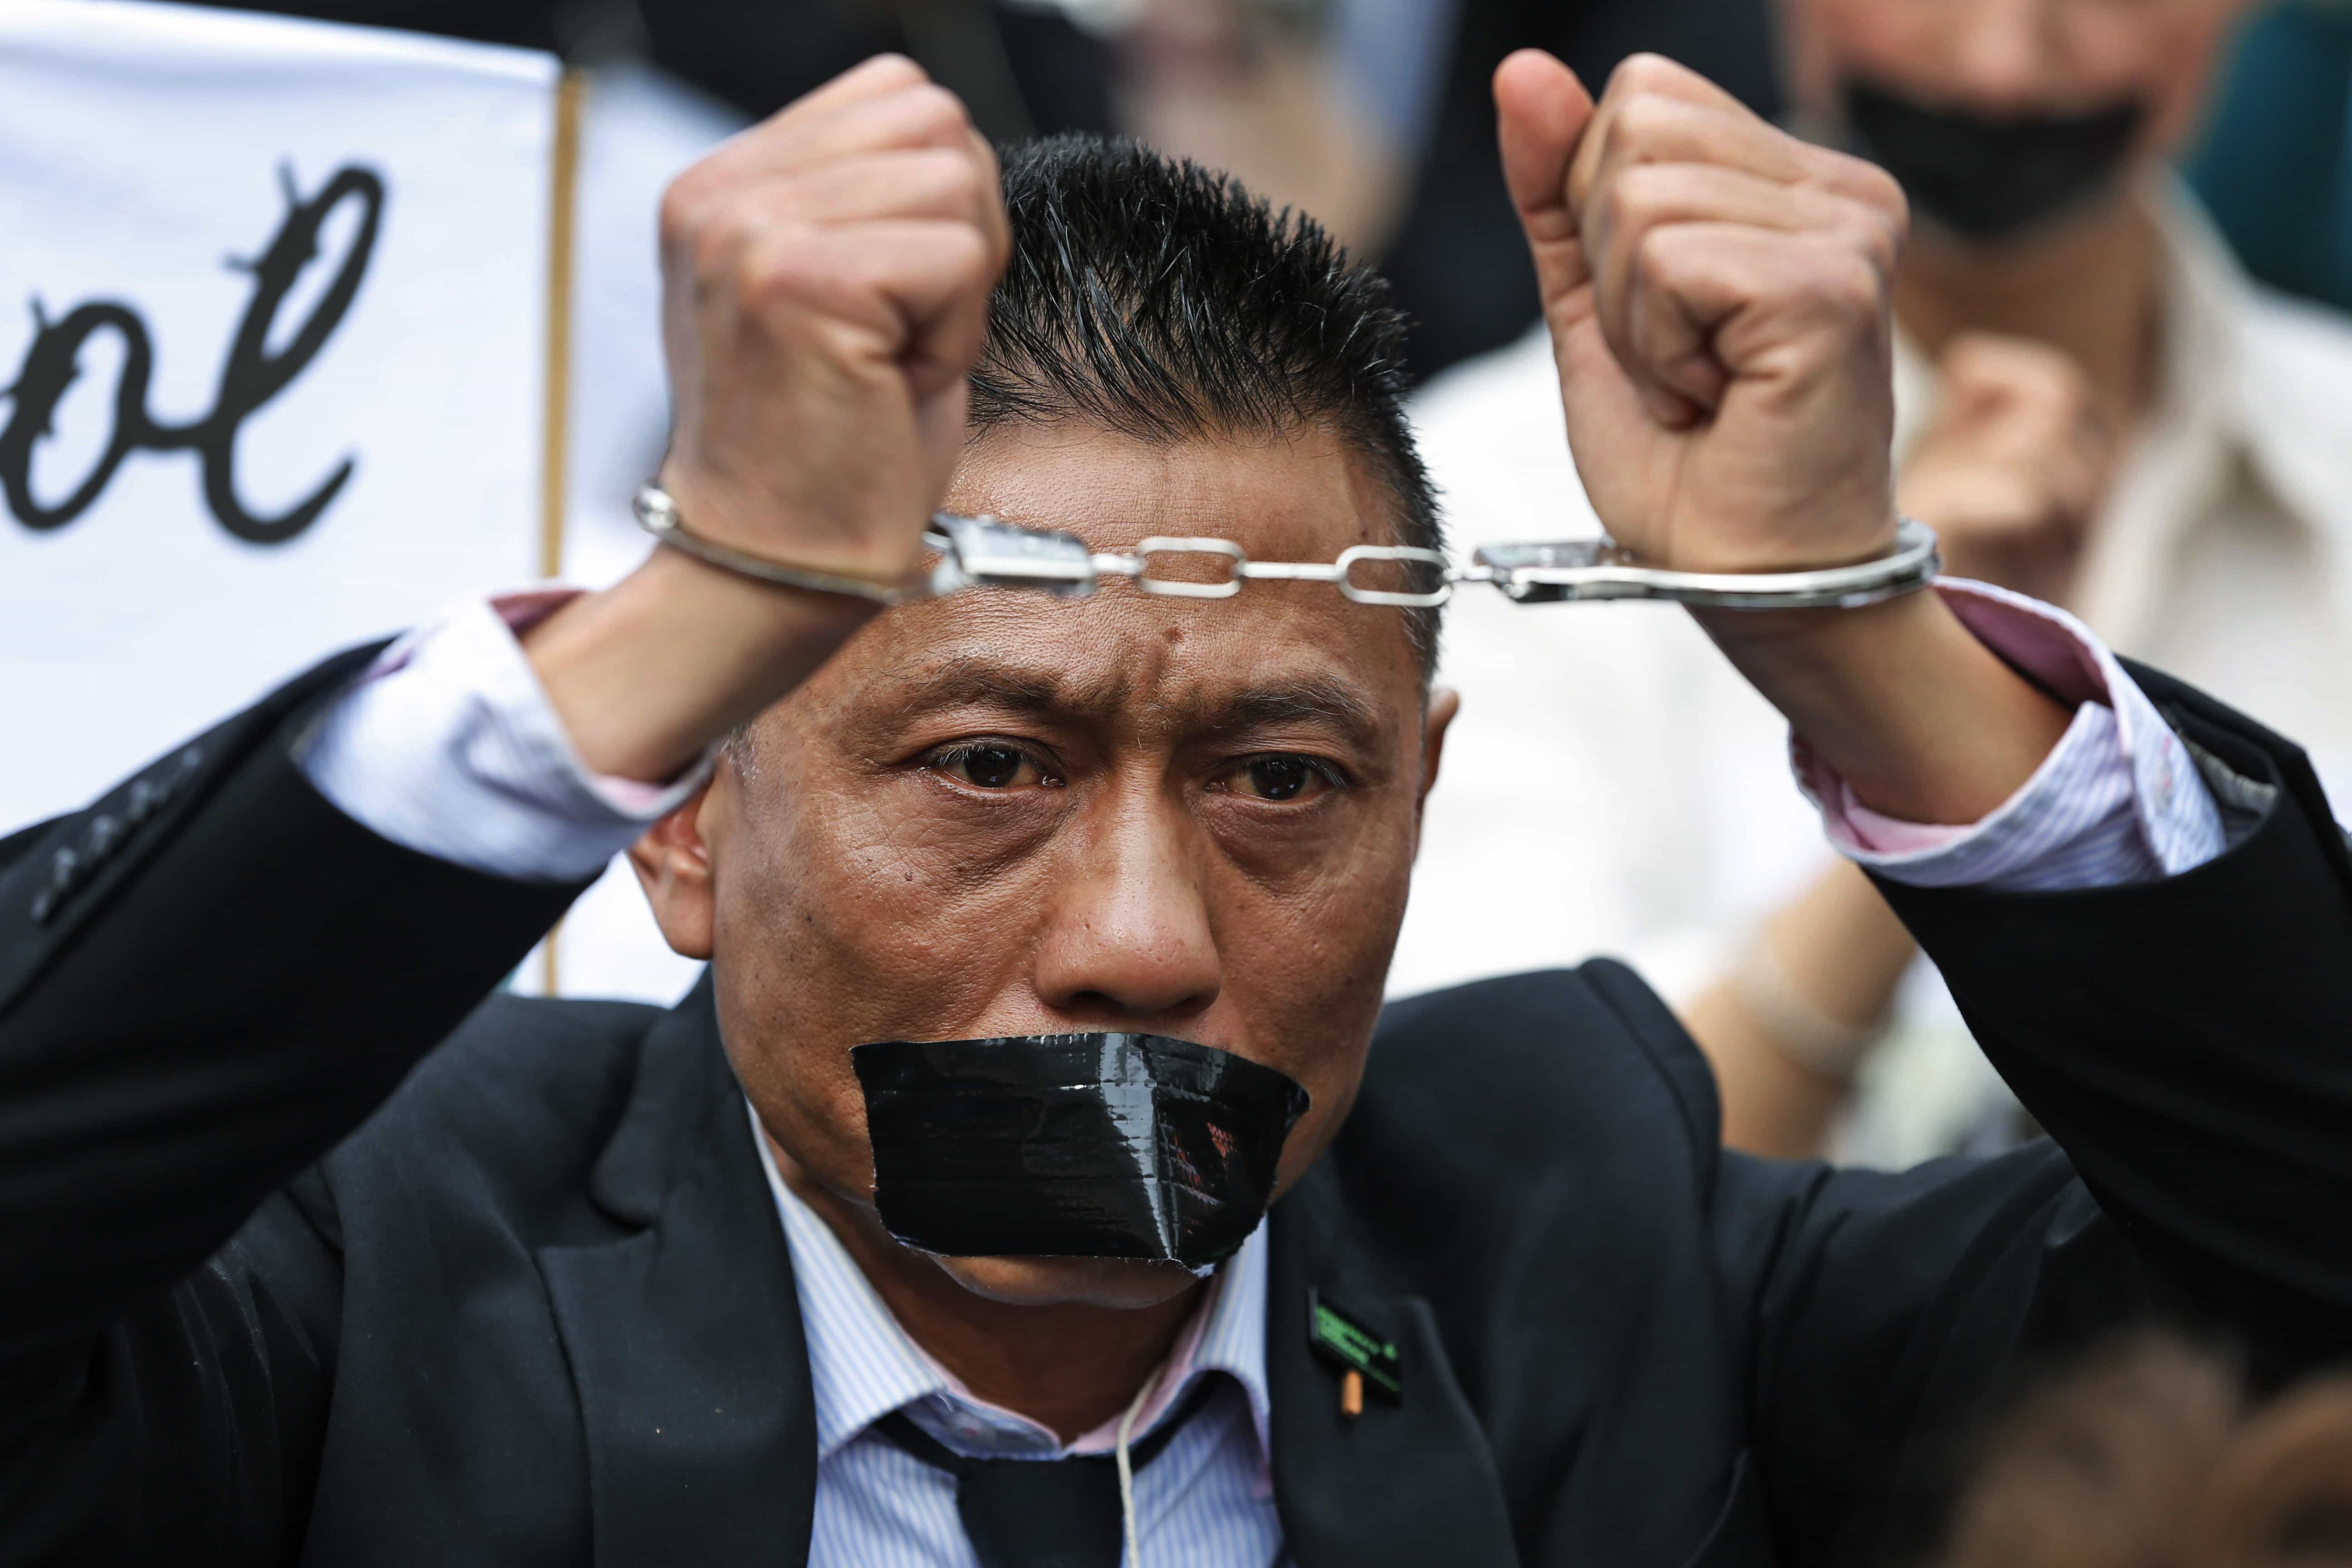 On 2 April 2014, a protester takes part in a rally near the Indonesian embassy in London, highlighting the detention of 76 political prisoners in Indonesia's West Papua province, AP Photo/Lefteris Pitarakis